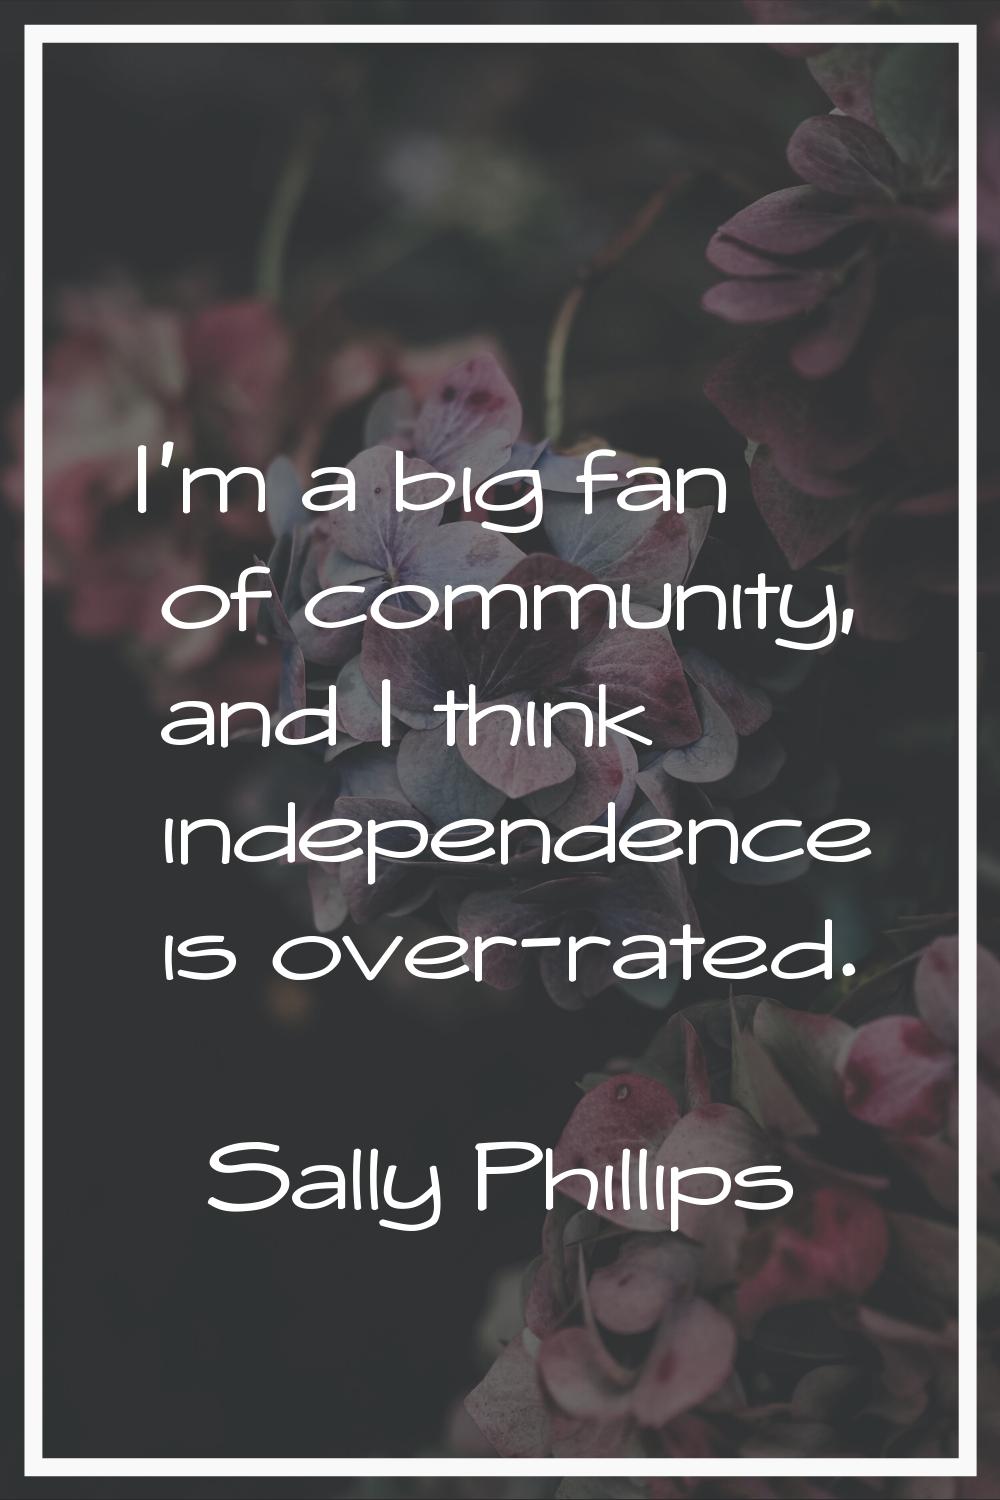 I'm a big fan of community, and I think independence is over-rated.